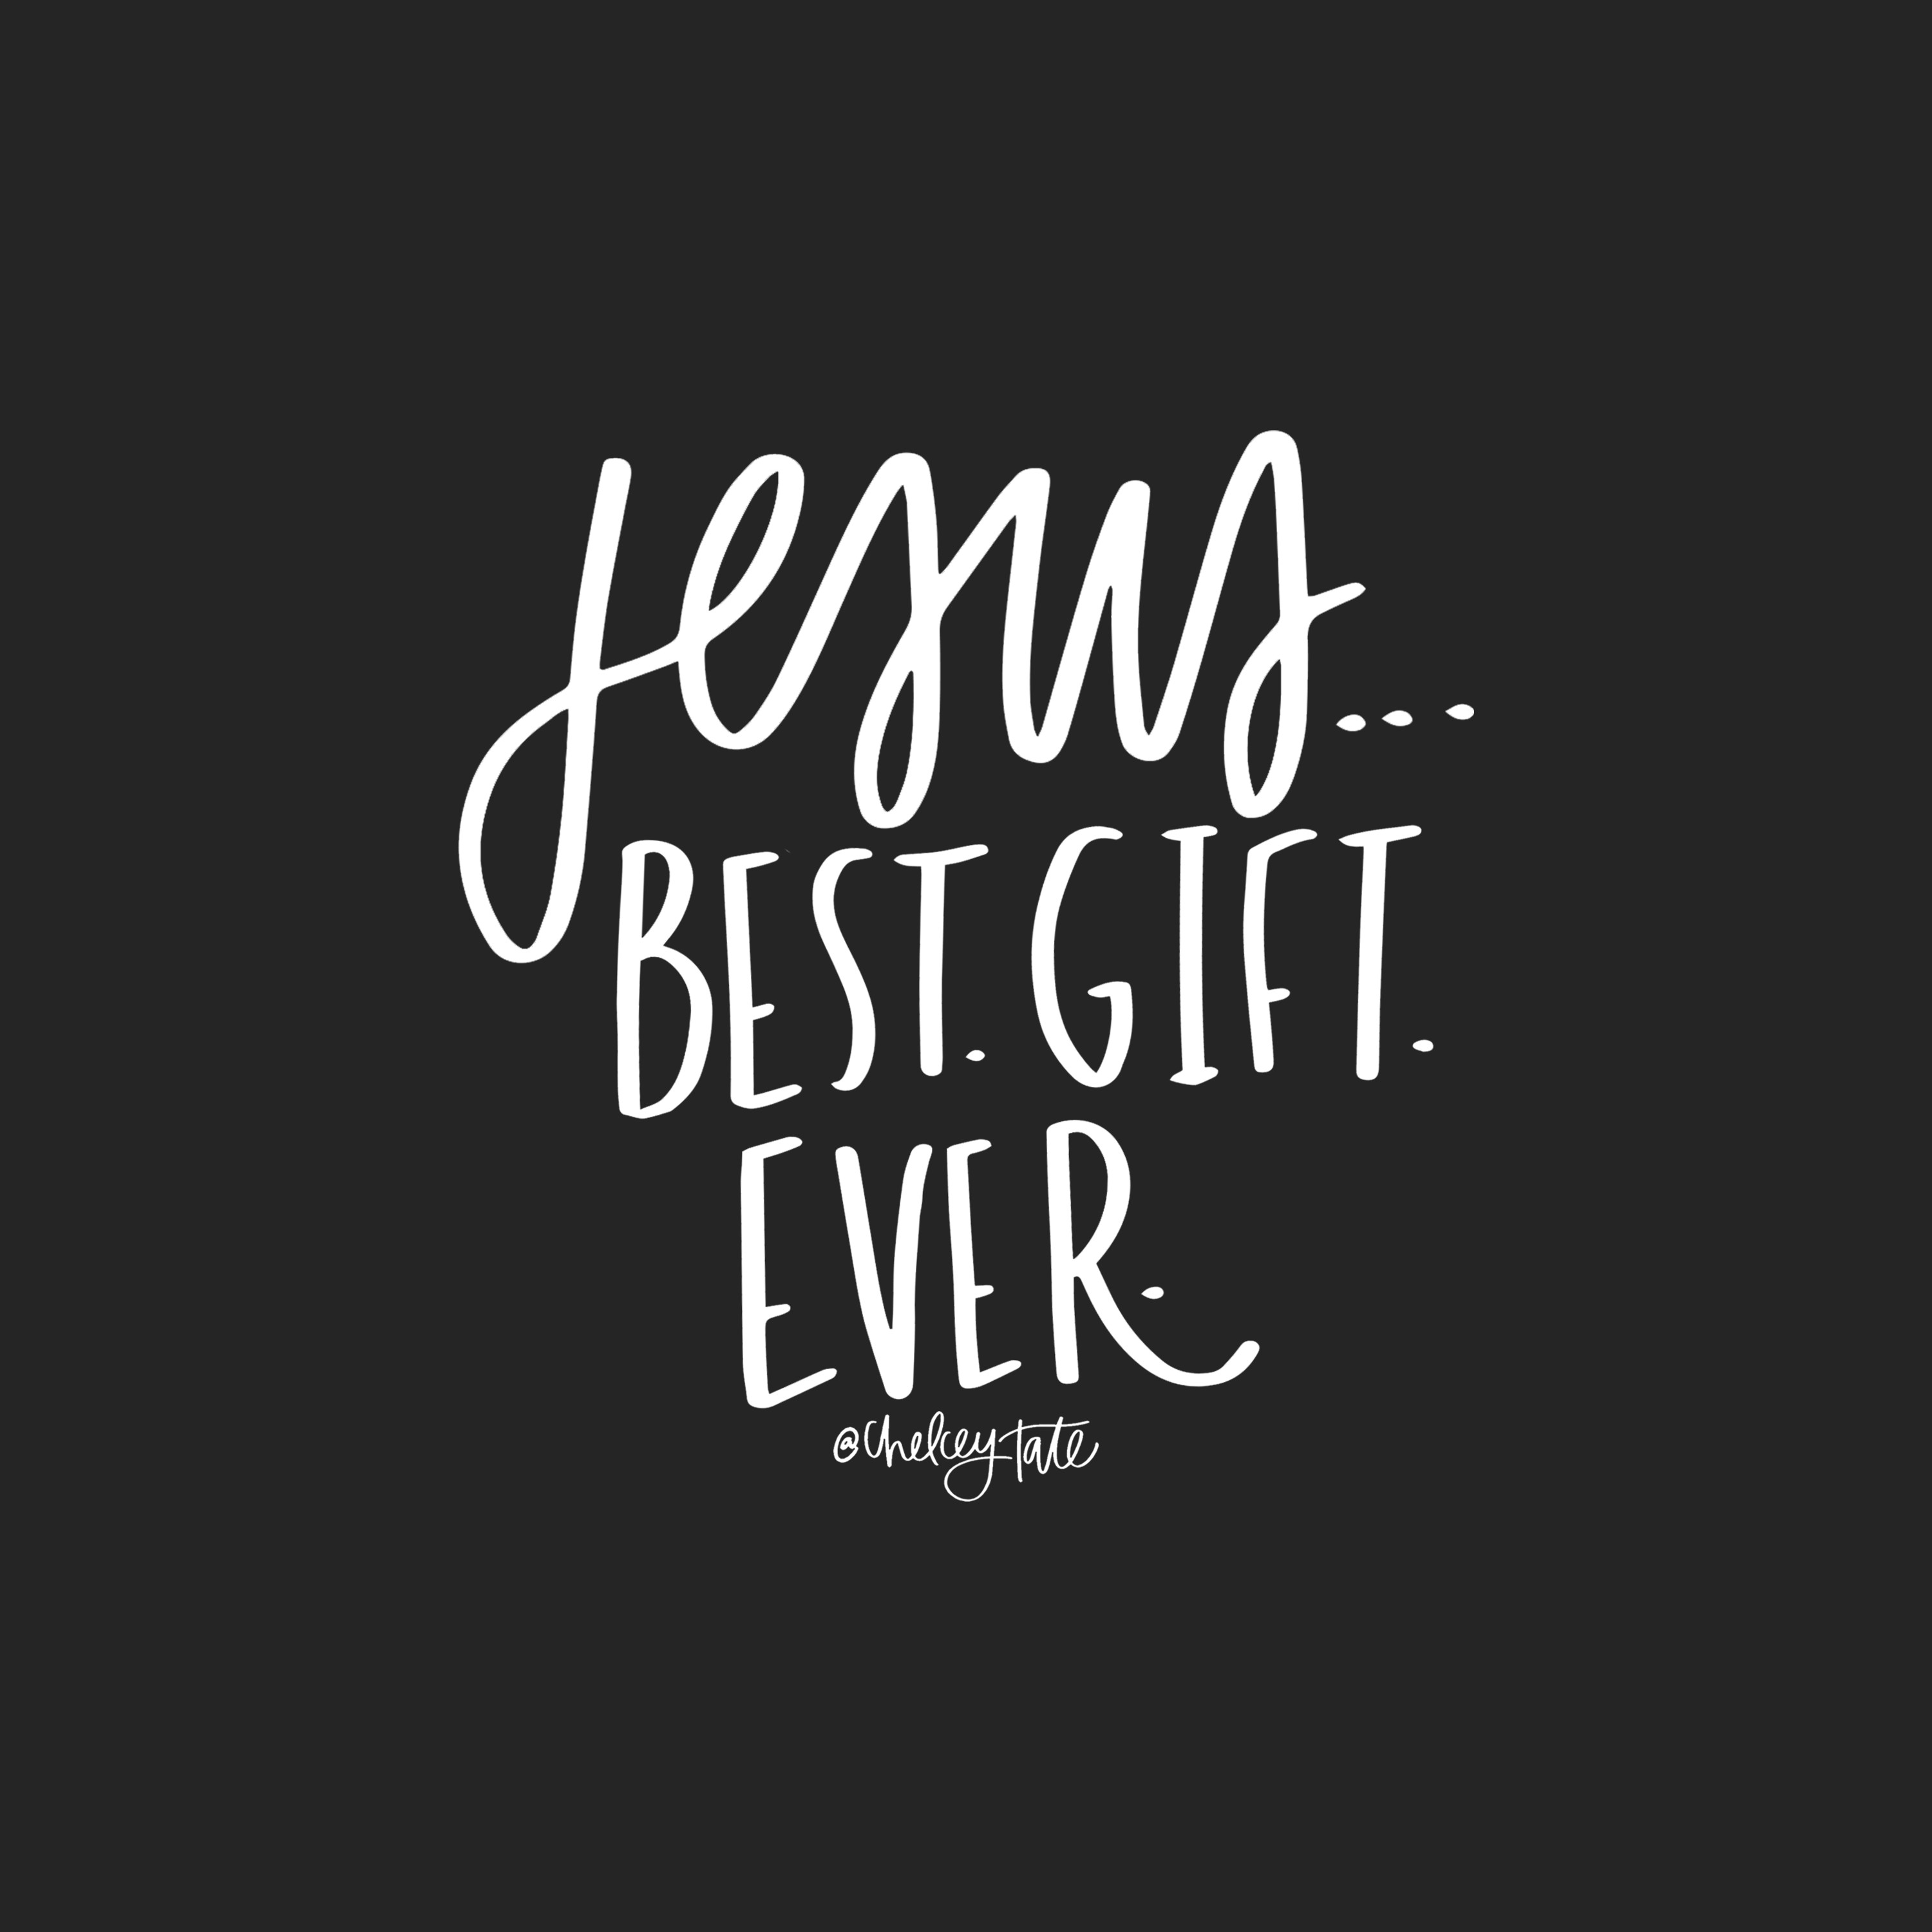 Christmas Christian Quotes
 Jesus Best Gift Ever Christian Christmas quote